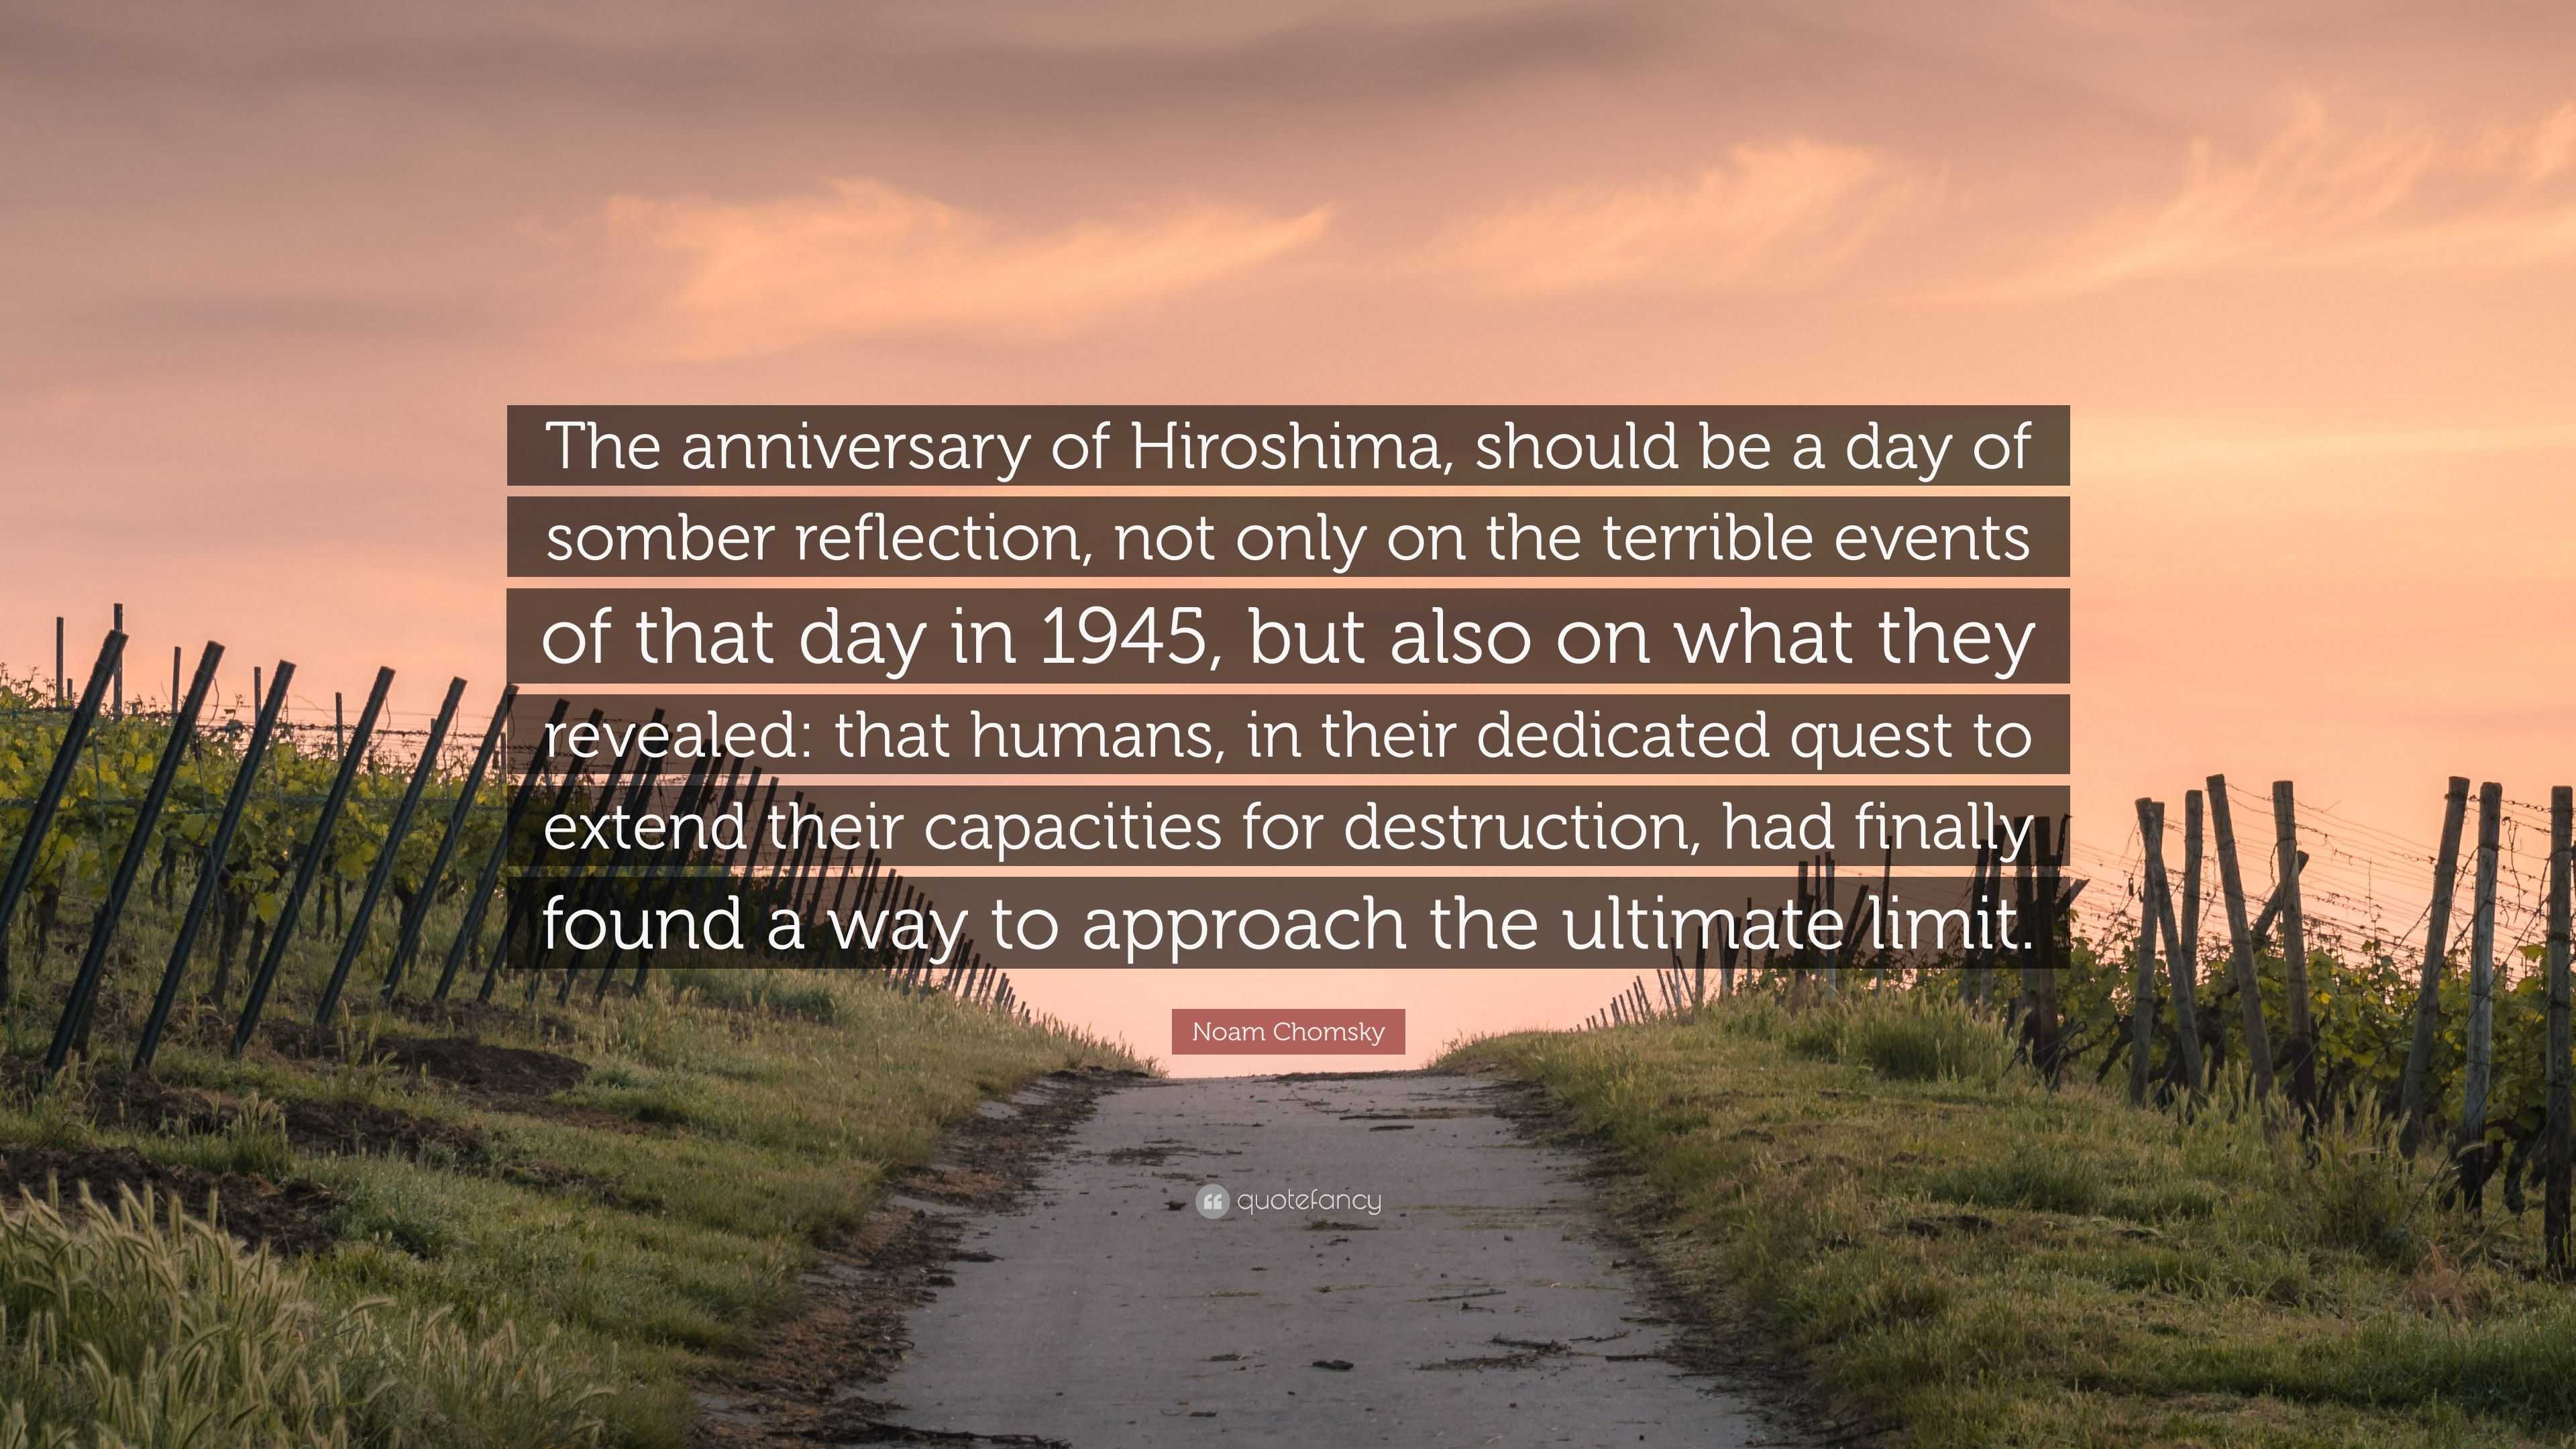 Noam Chomsky Quote: “The anniversary of Hiroshima, should be a day of